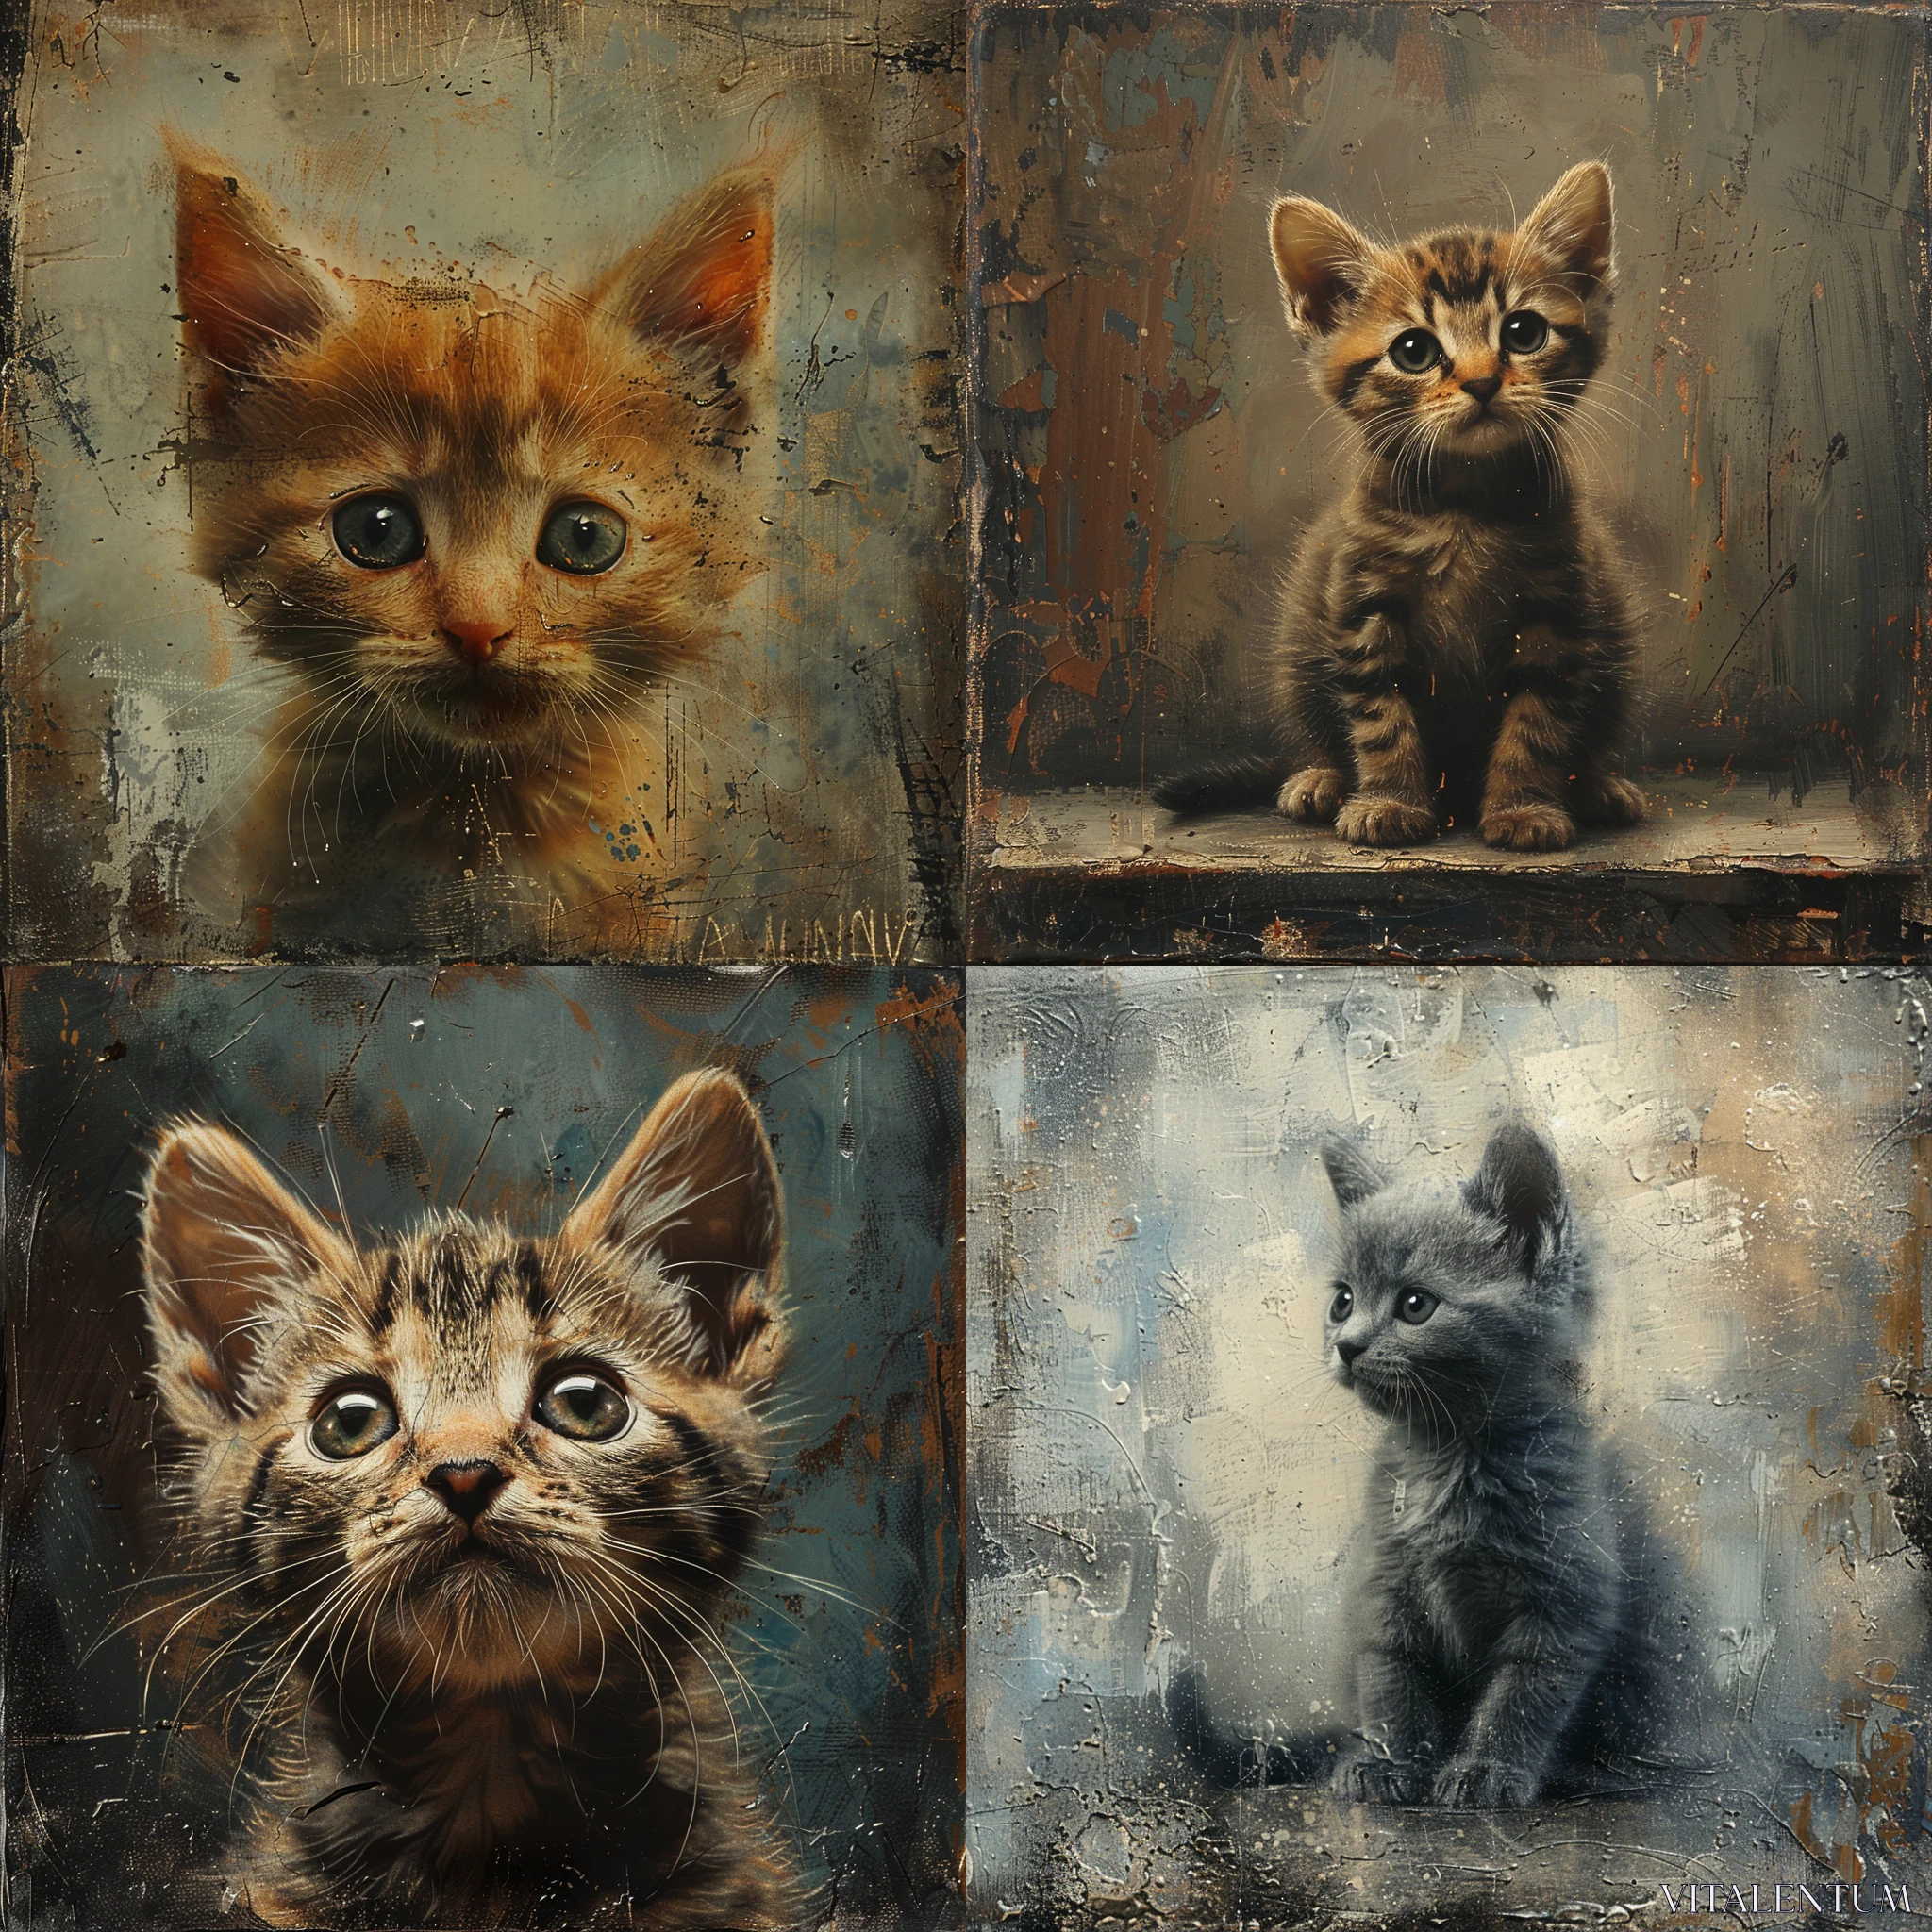 PROMPT A detailed oil painting of an adorable kitten, looking up at you with big eyes.